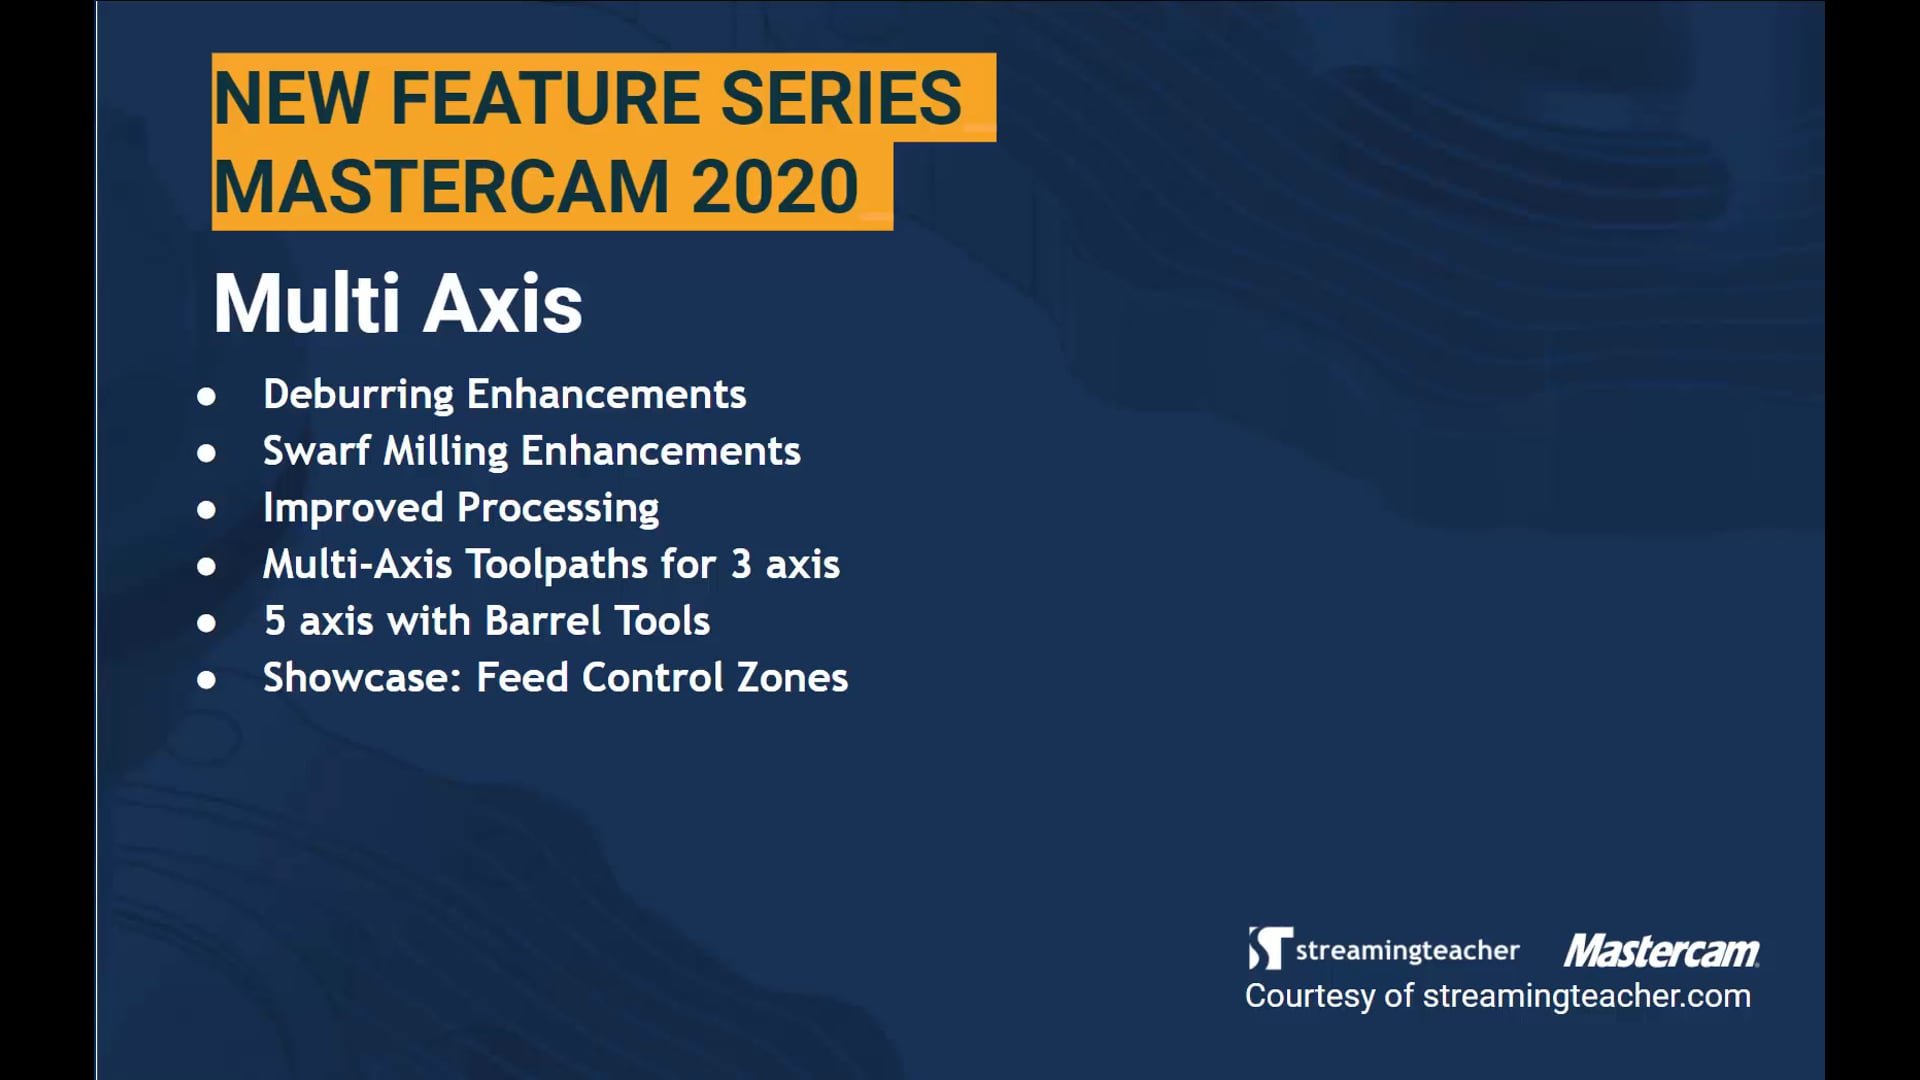 2020 New Feature Series - Multi Axis